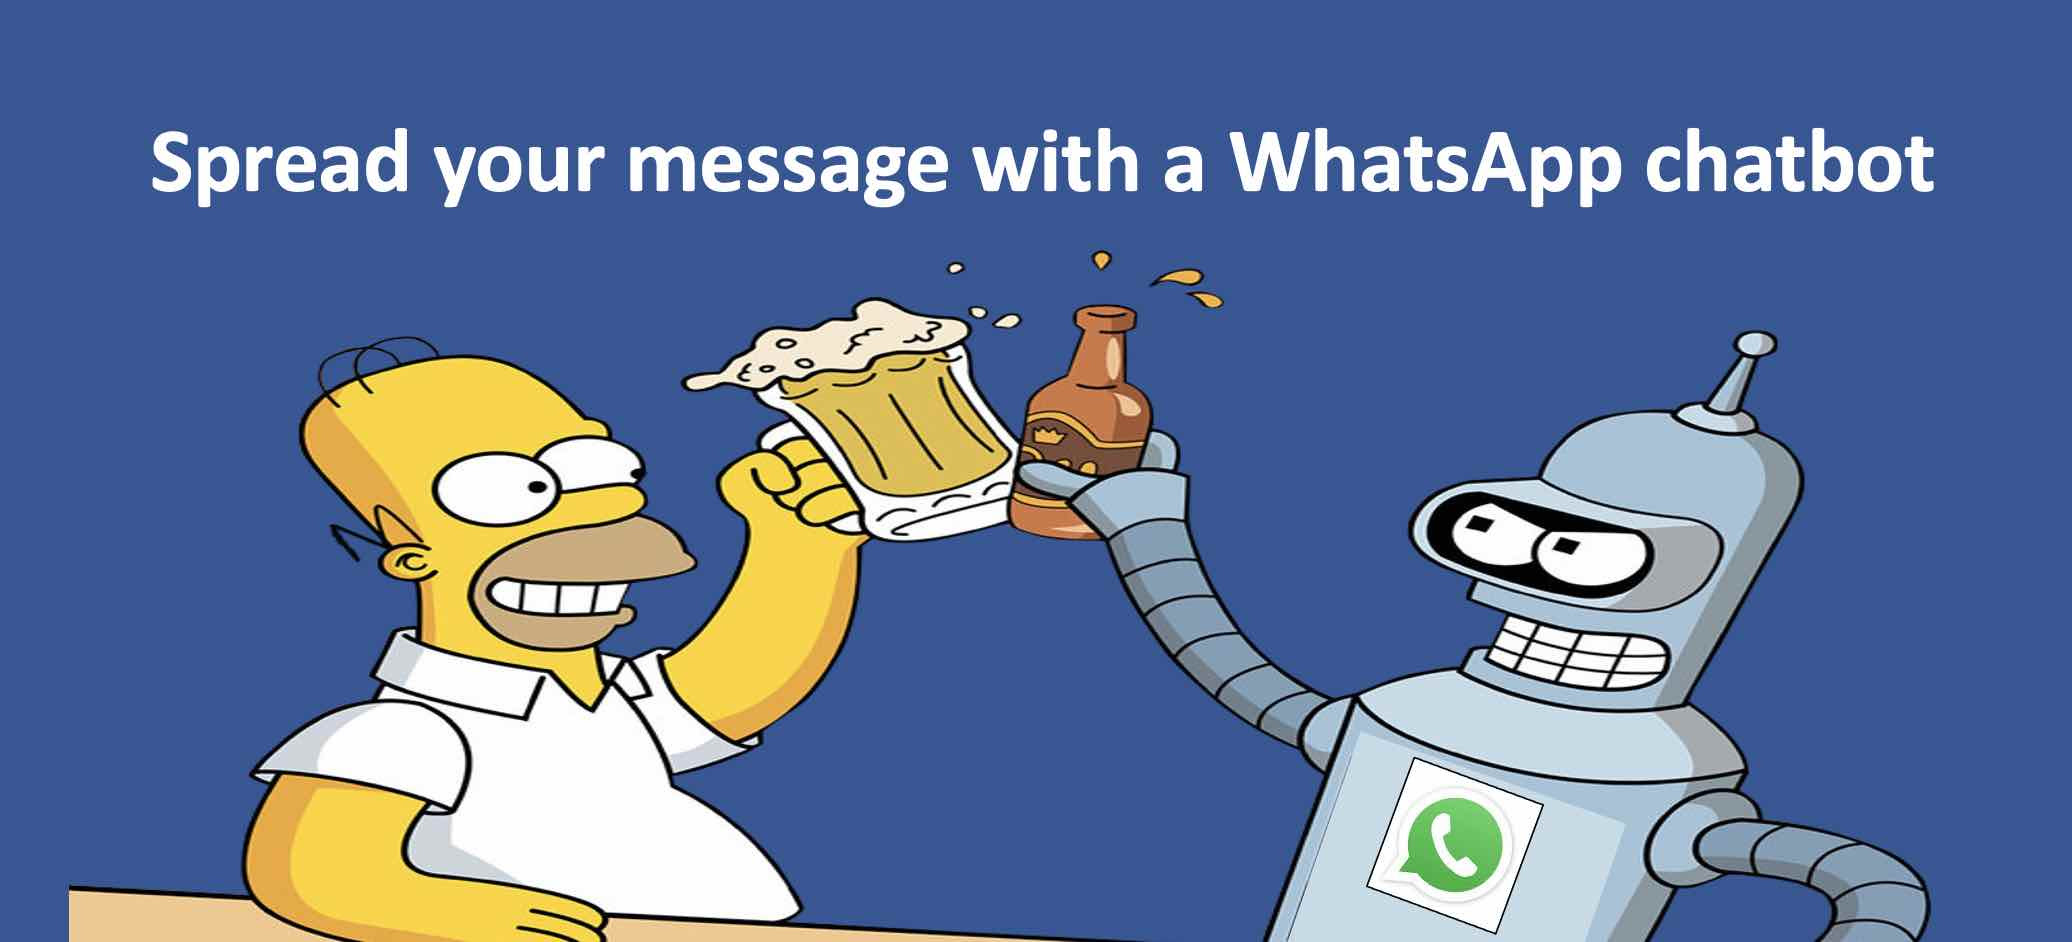 Spread your message with a WhatsApp chatbot